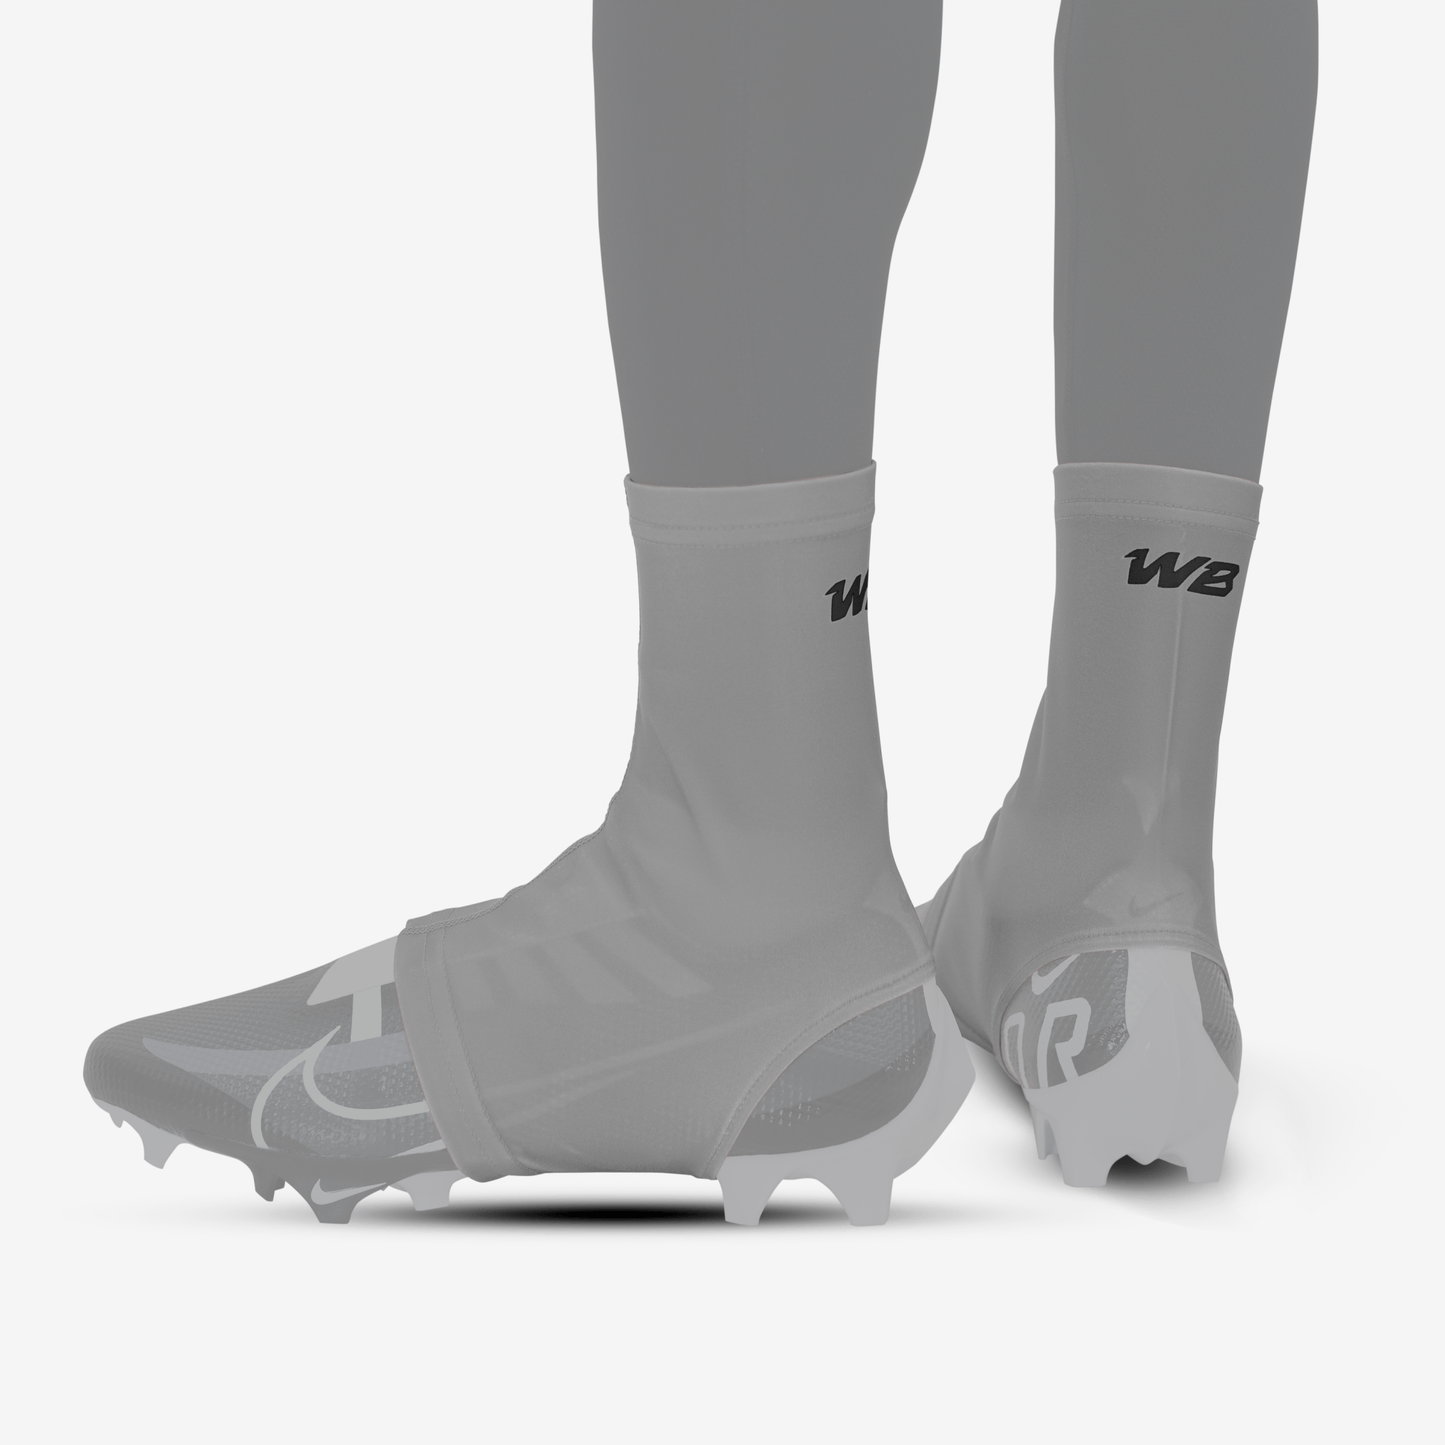 CLEAT COVERS (GREY) - We Ball Sports